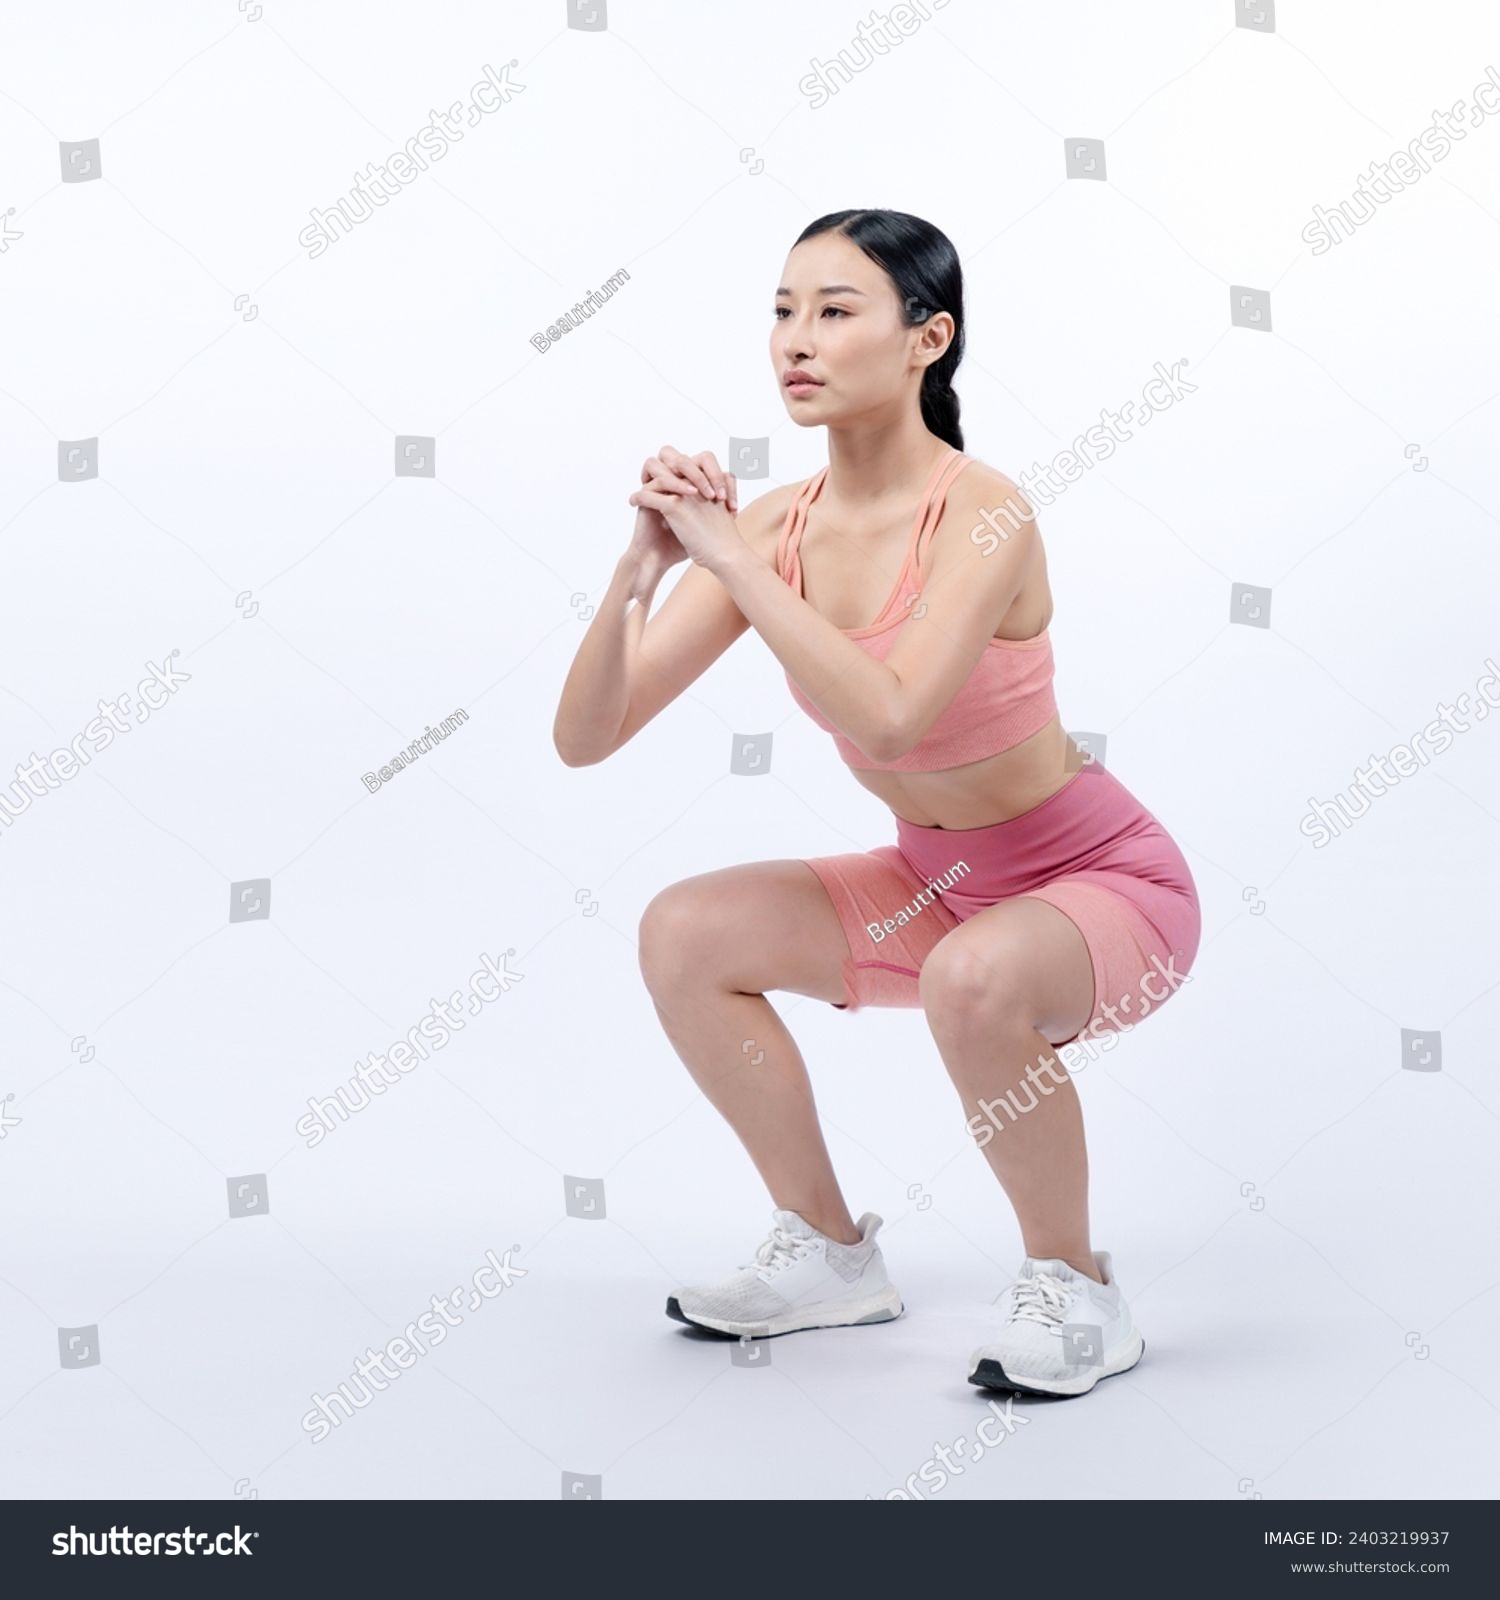 Vigorous energetic woman doing exercise. Young athletic asian woman strength and endurance training session as squat workout routine session. Full body studio shot on isolated background. #2403219937